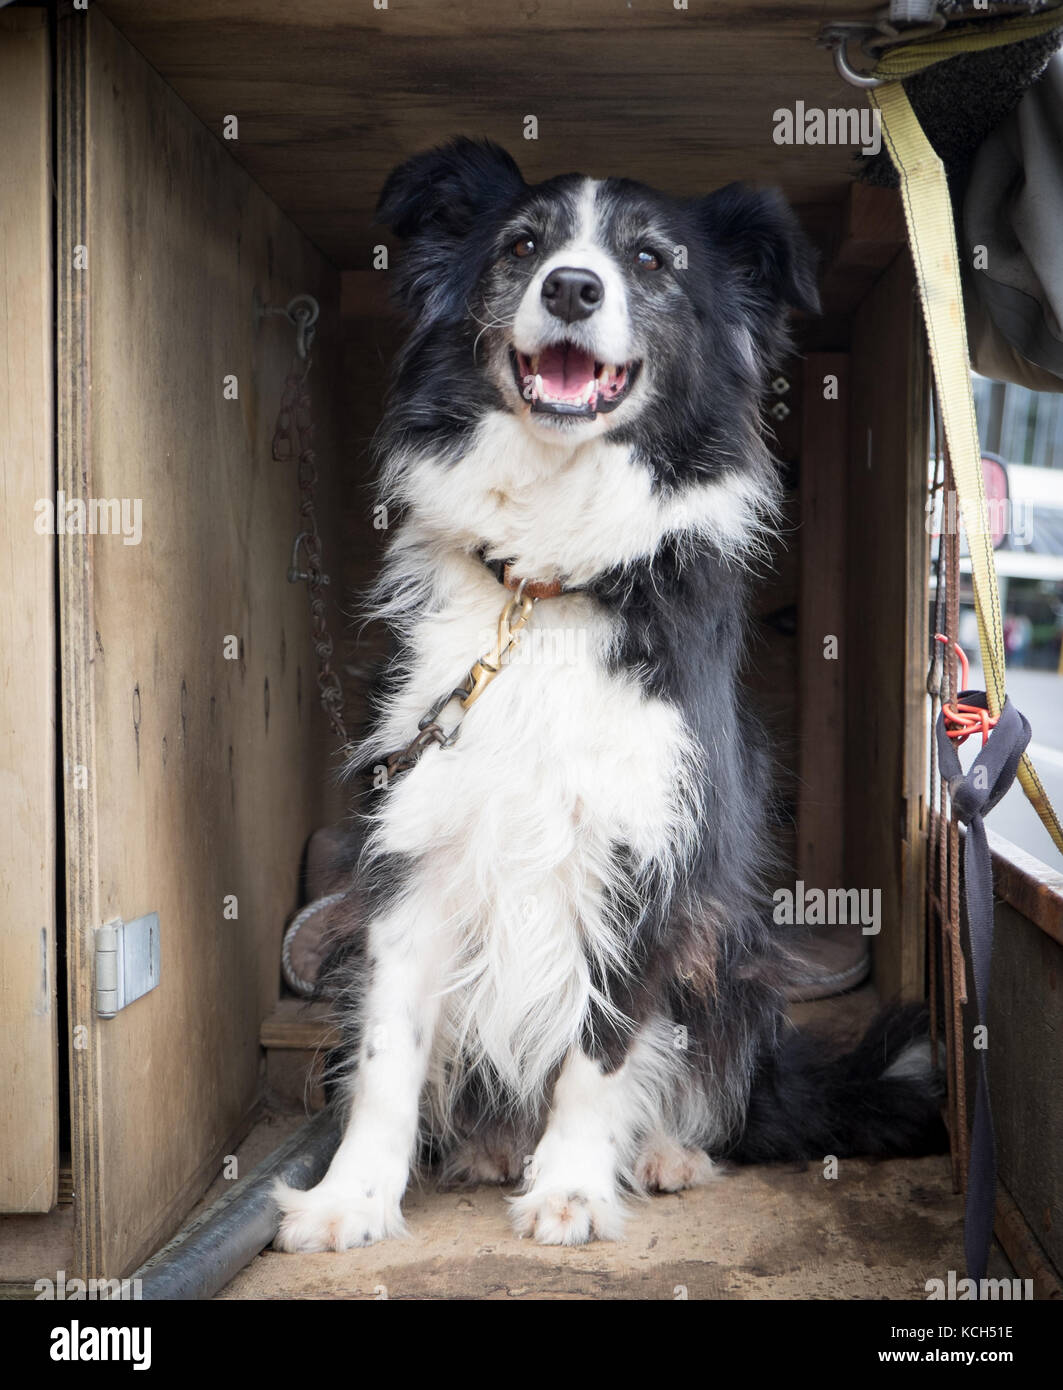 Border collie farm dog on a lead waiting for owner in back of ute utility vehicle or pickup truck Stock Photo